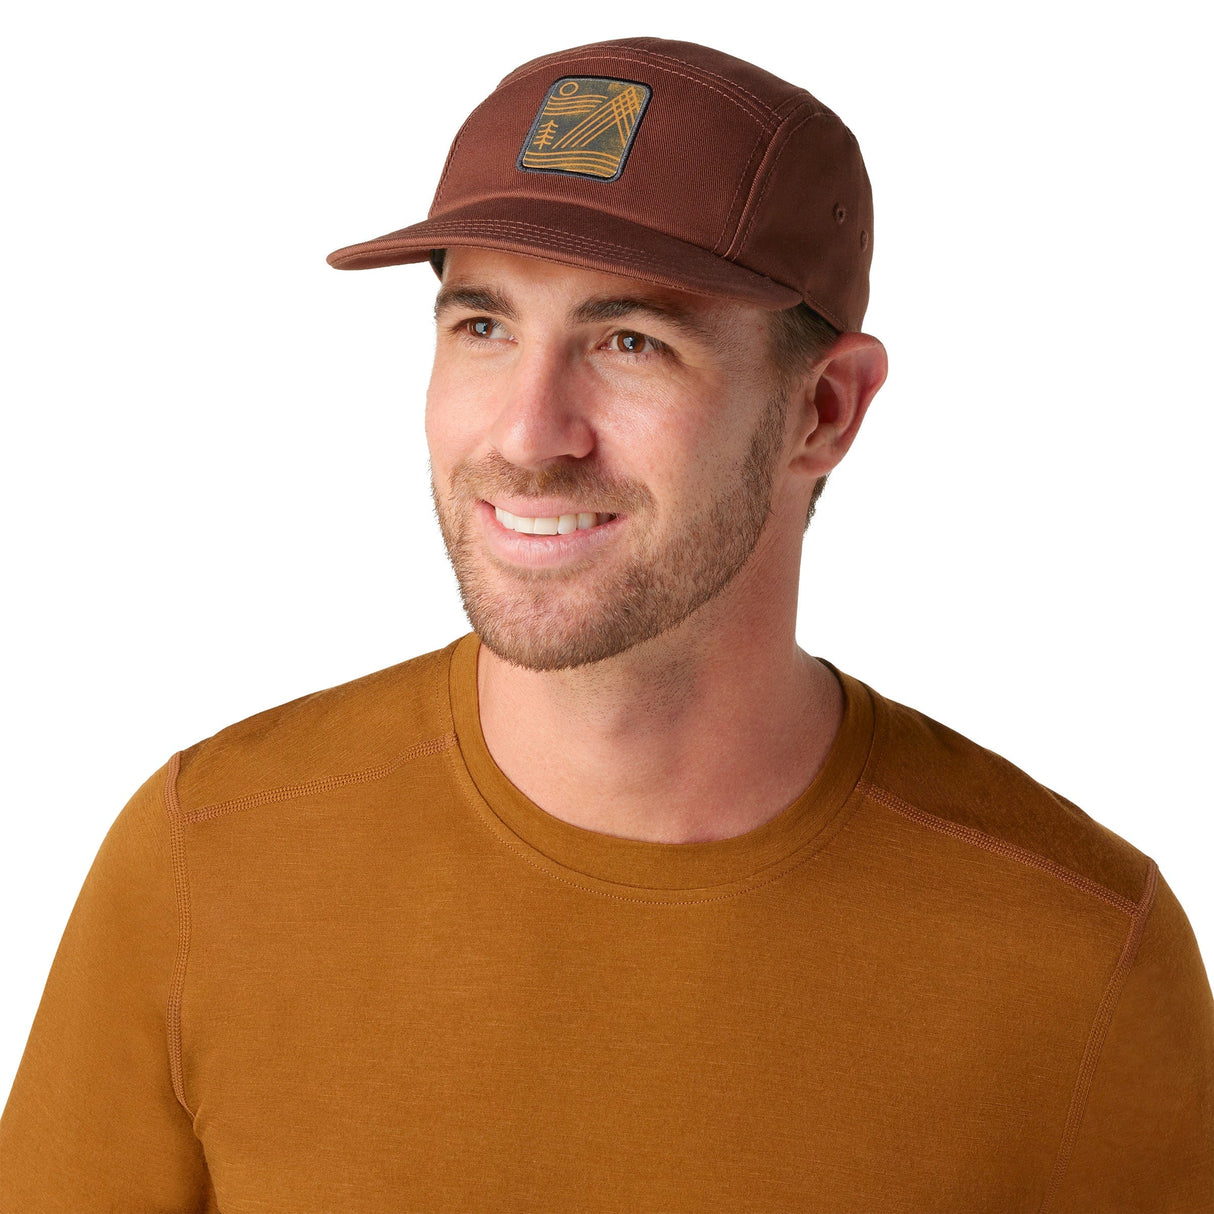 Smartwool Mountain Breeze 5-Panel Hat  -  One Size Fits Most / Fox Brown